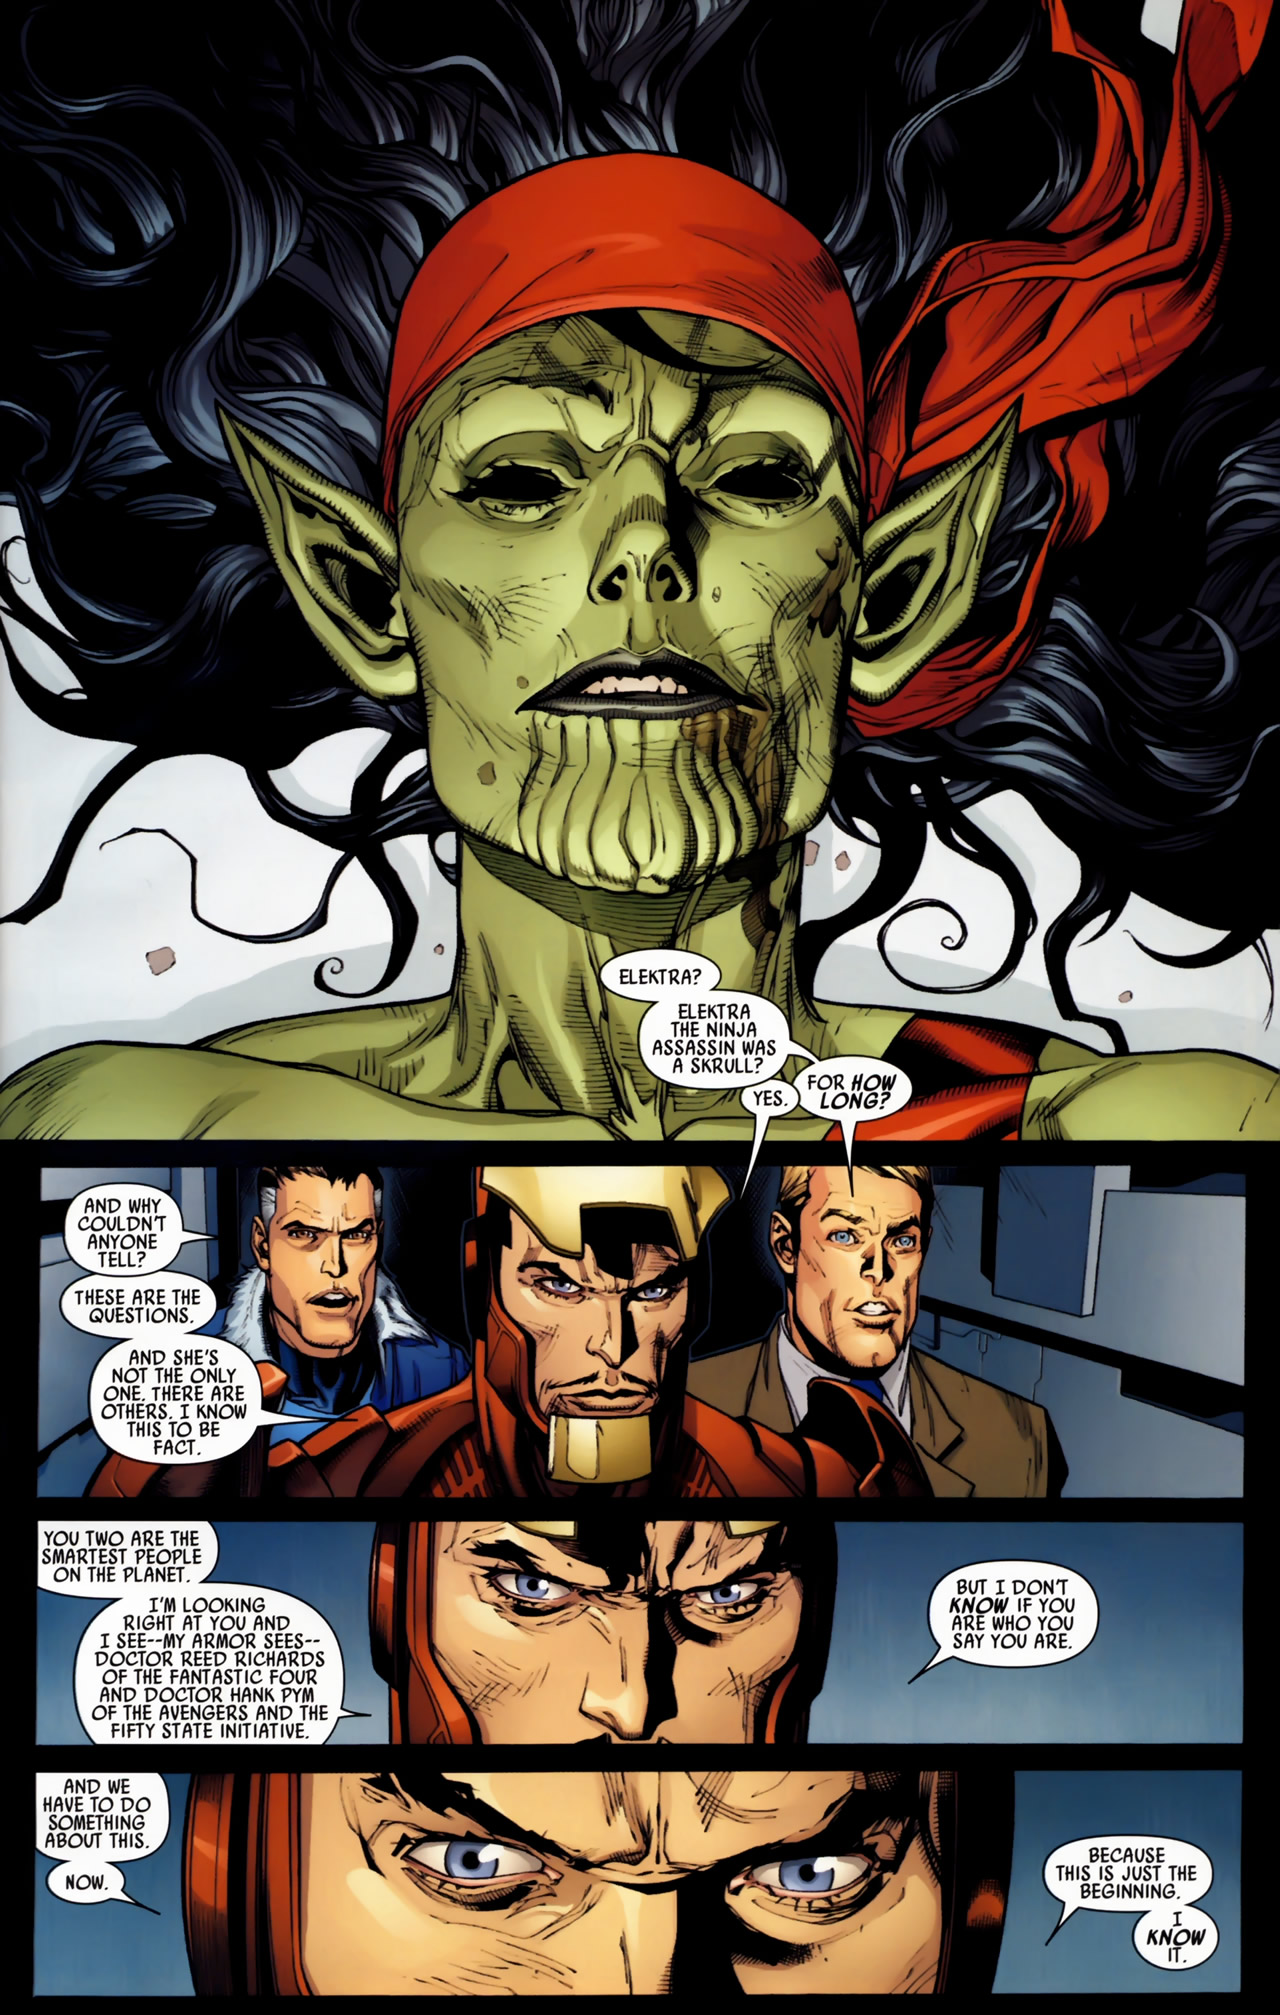 Doctor Strange brings The New Avengers' recent discovery to The Illuminati in Secret Invasion Vol. 1 #1 (2008), Marvel Comics. Words by Brian Michael Bendis, art by Leinil Francis Yu, Mark Morales, and Laura Martin.